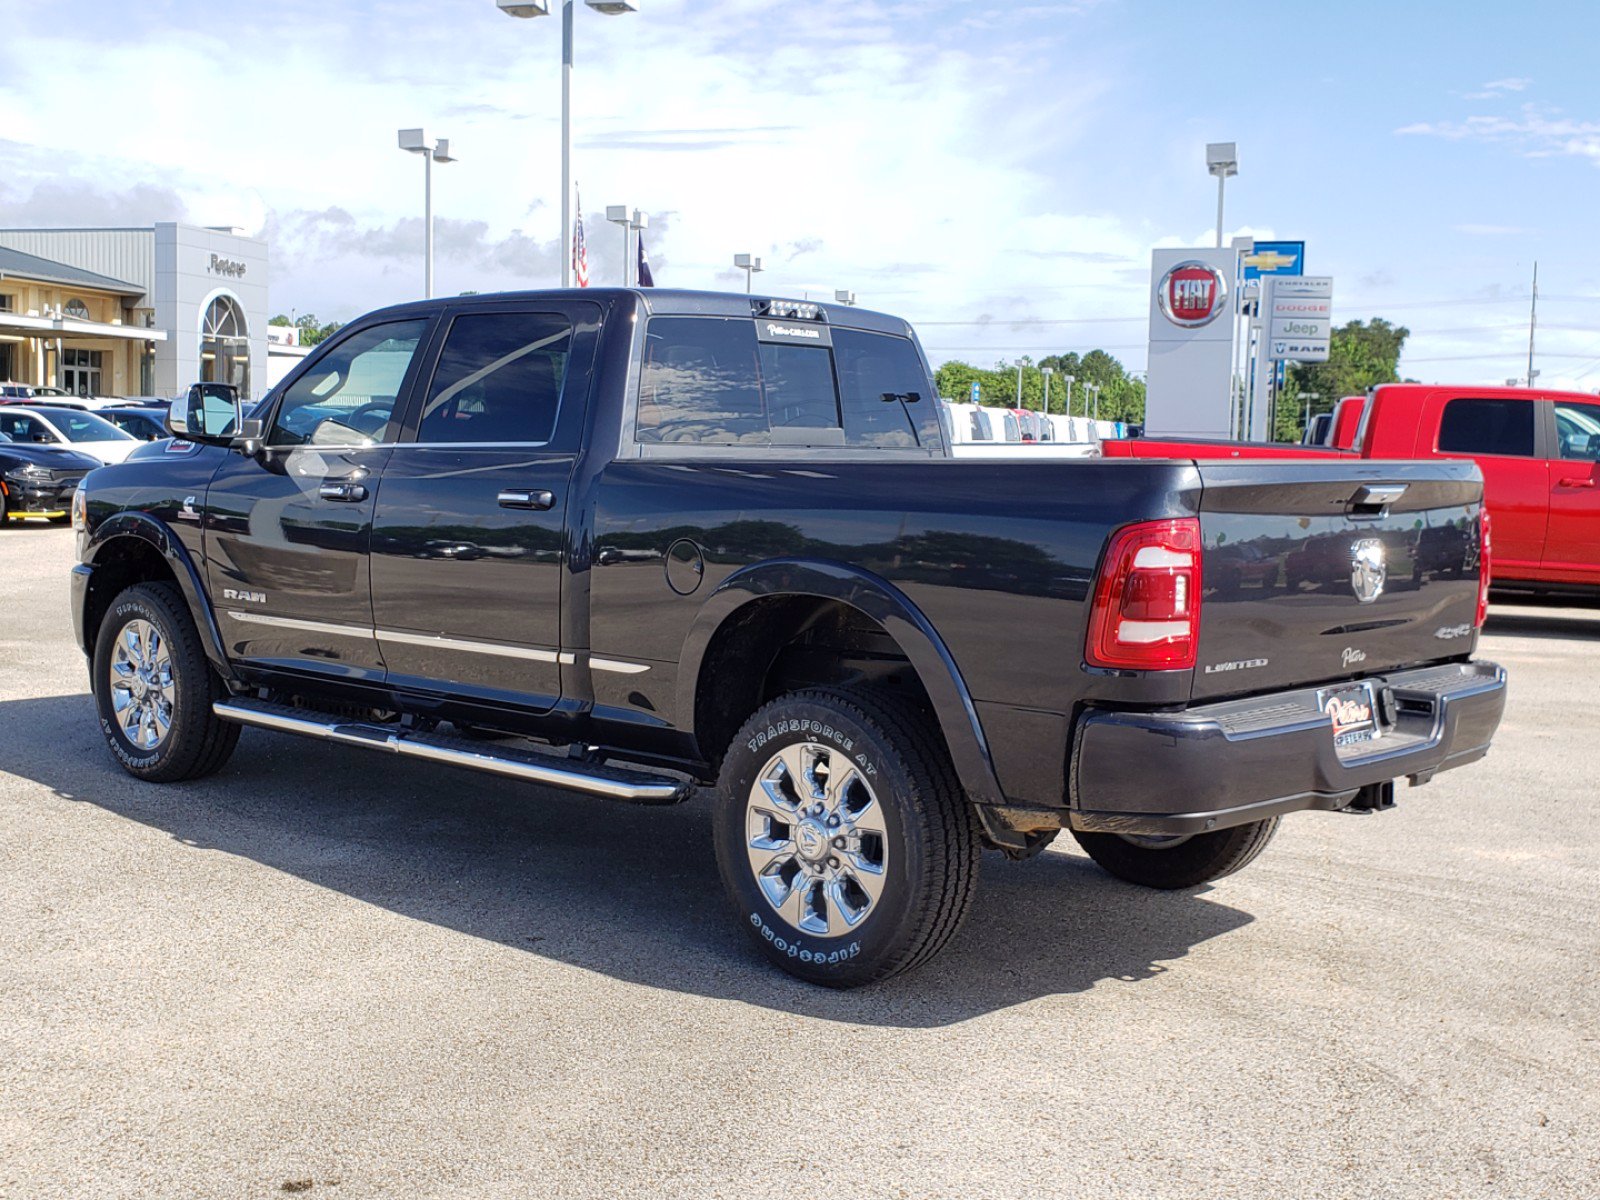 New 2020 Ram 2500 Limited Crew Cab in Longview #20D530 | Peters